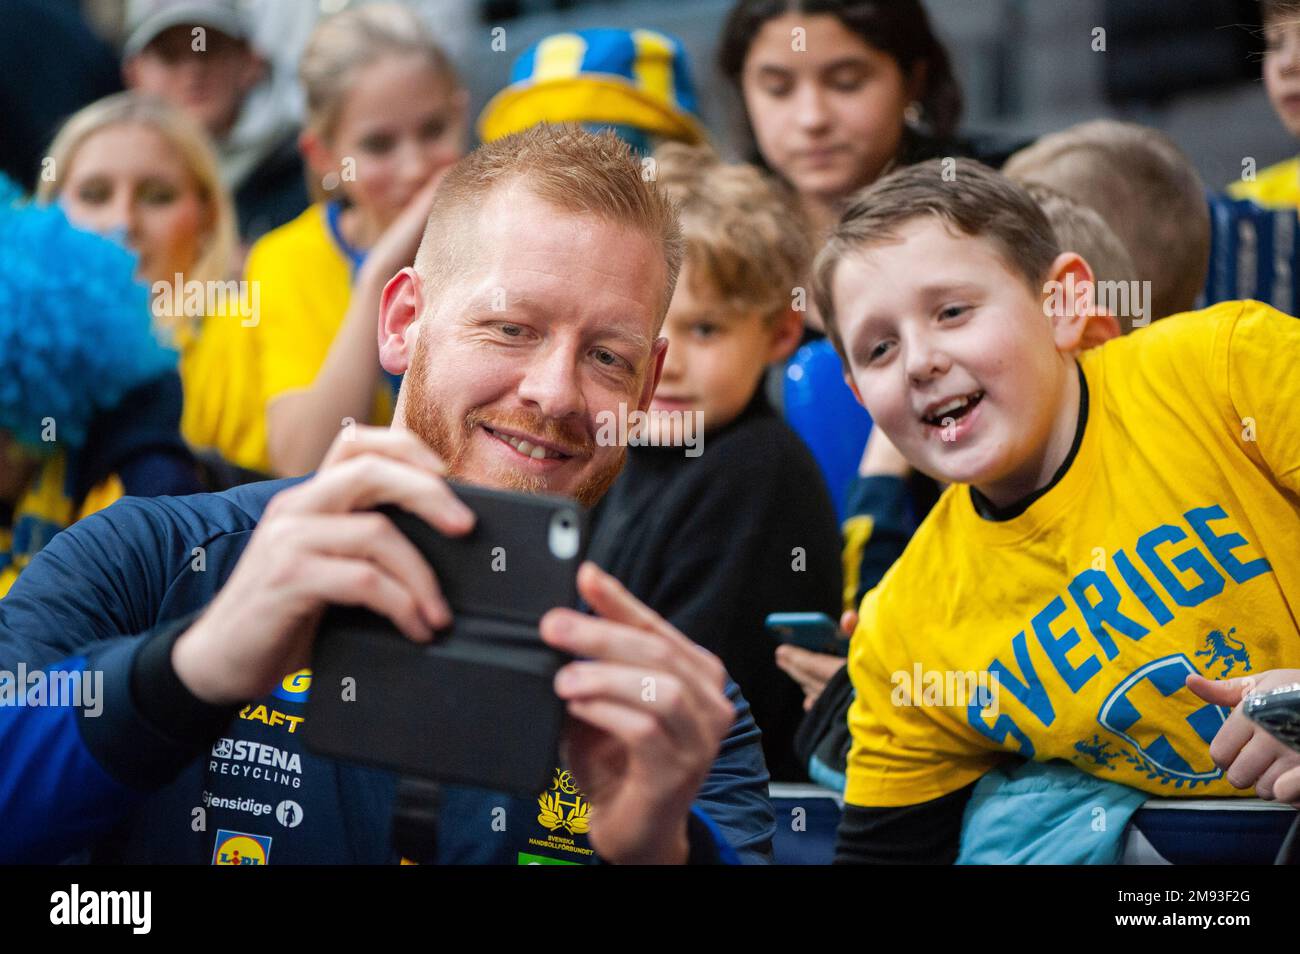 Gothenburg, Sweden. 16th Jan 2023. Jim Gottfridsson of Sweden taking a picture with a fan after the 2023 IHF World Men’s Handball Championship game between Uruguay and Sweden on January 16th, 2023 in Gothenburg. Credit: Oskar Olteus / Alamy Live News Stock Photo